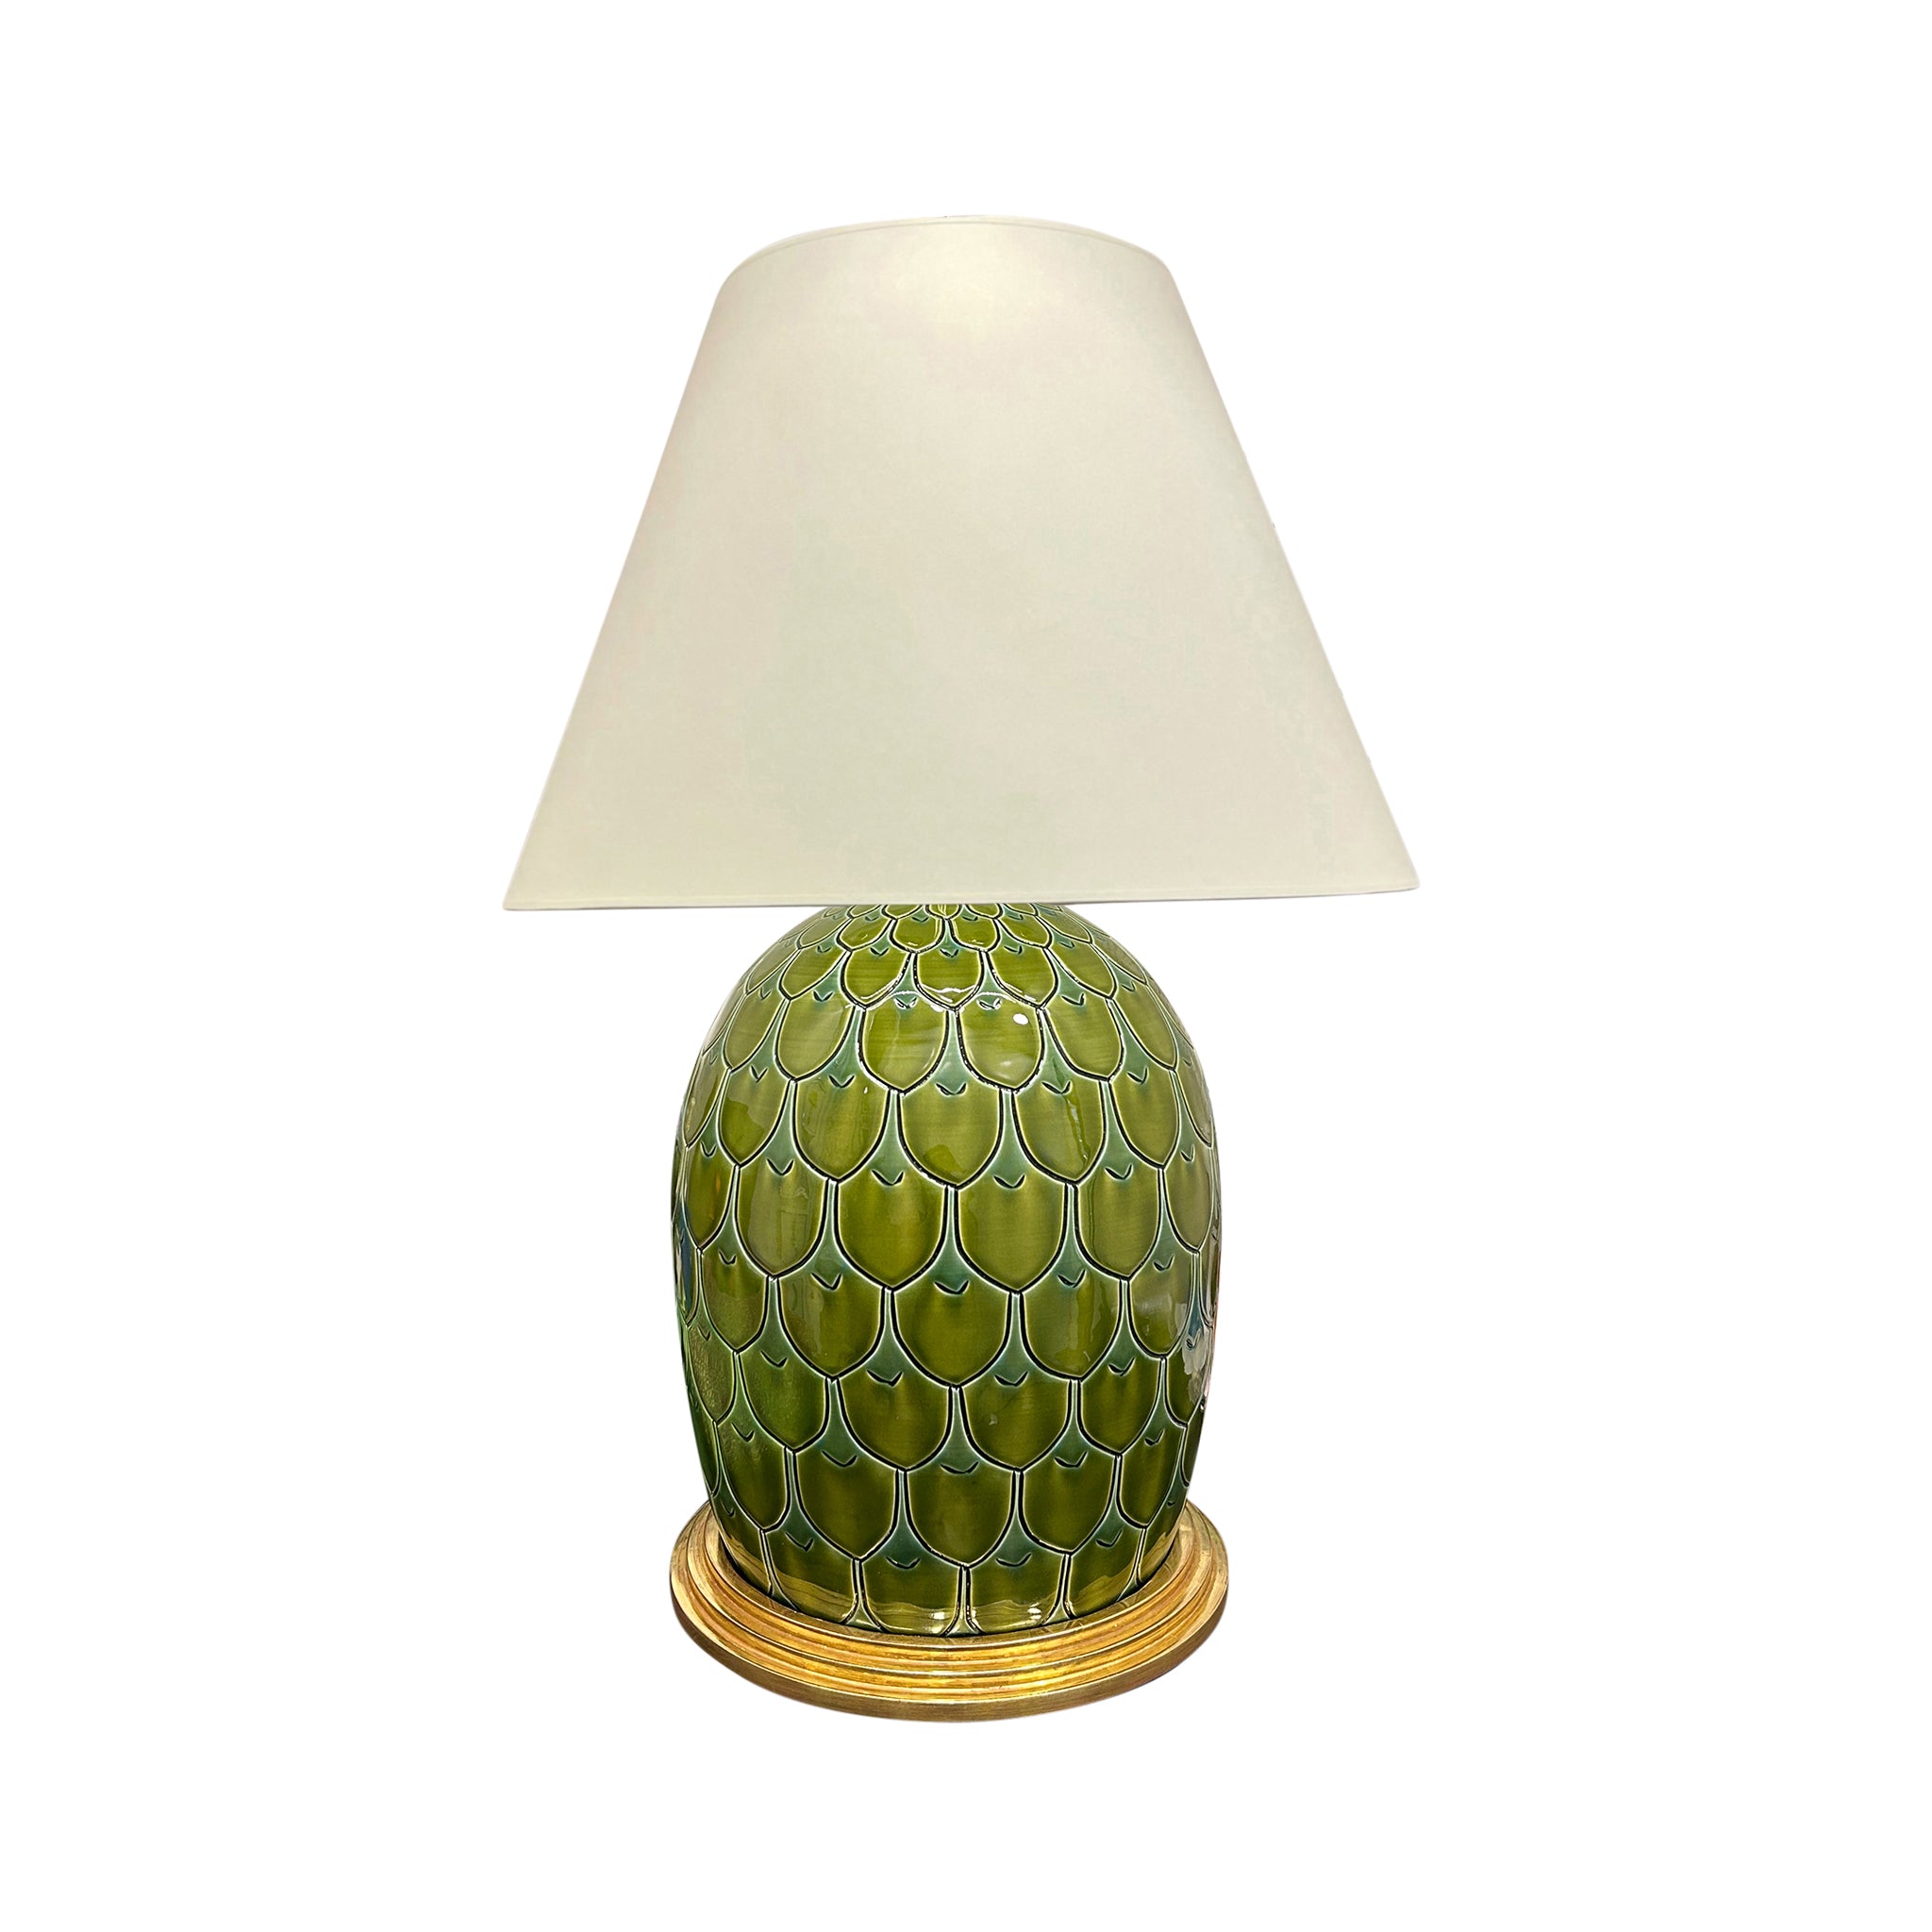 Kate Lamp in Spruce and Prussian Sgraffito